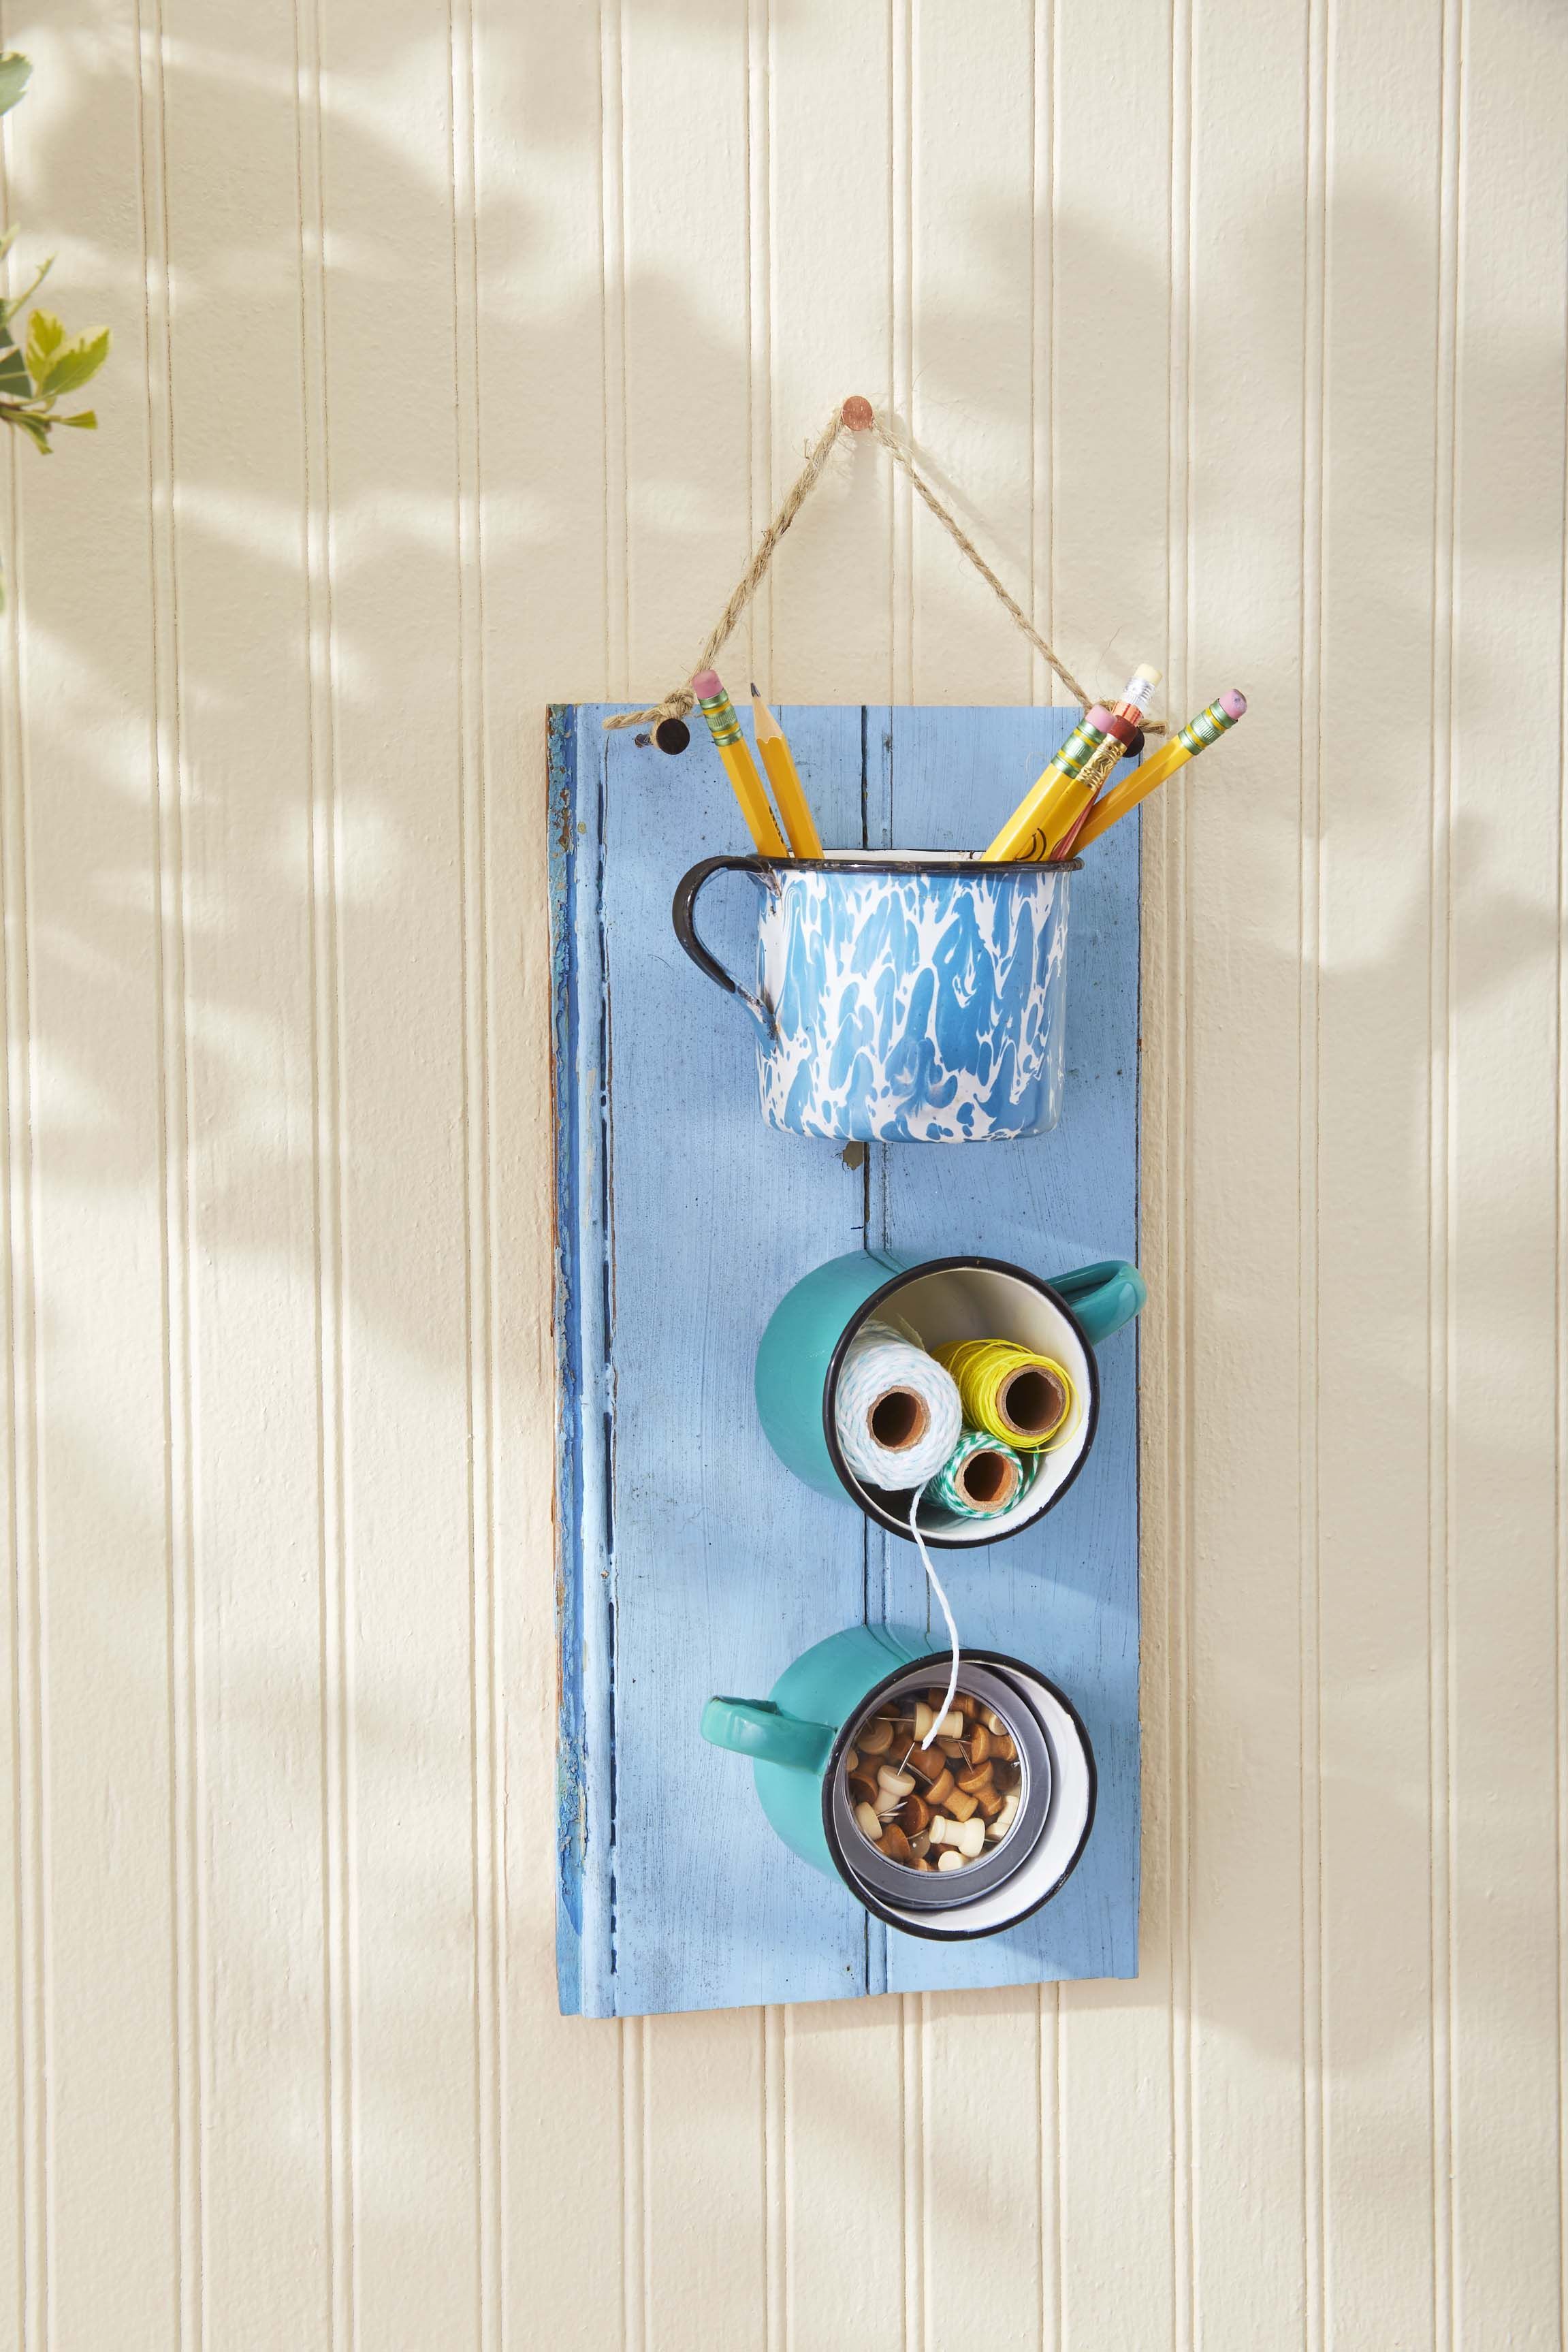 31 delightful DIY projects for any summer day spent indoors